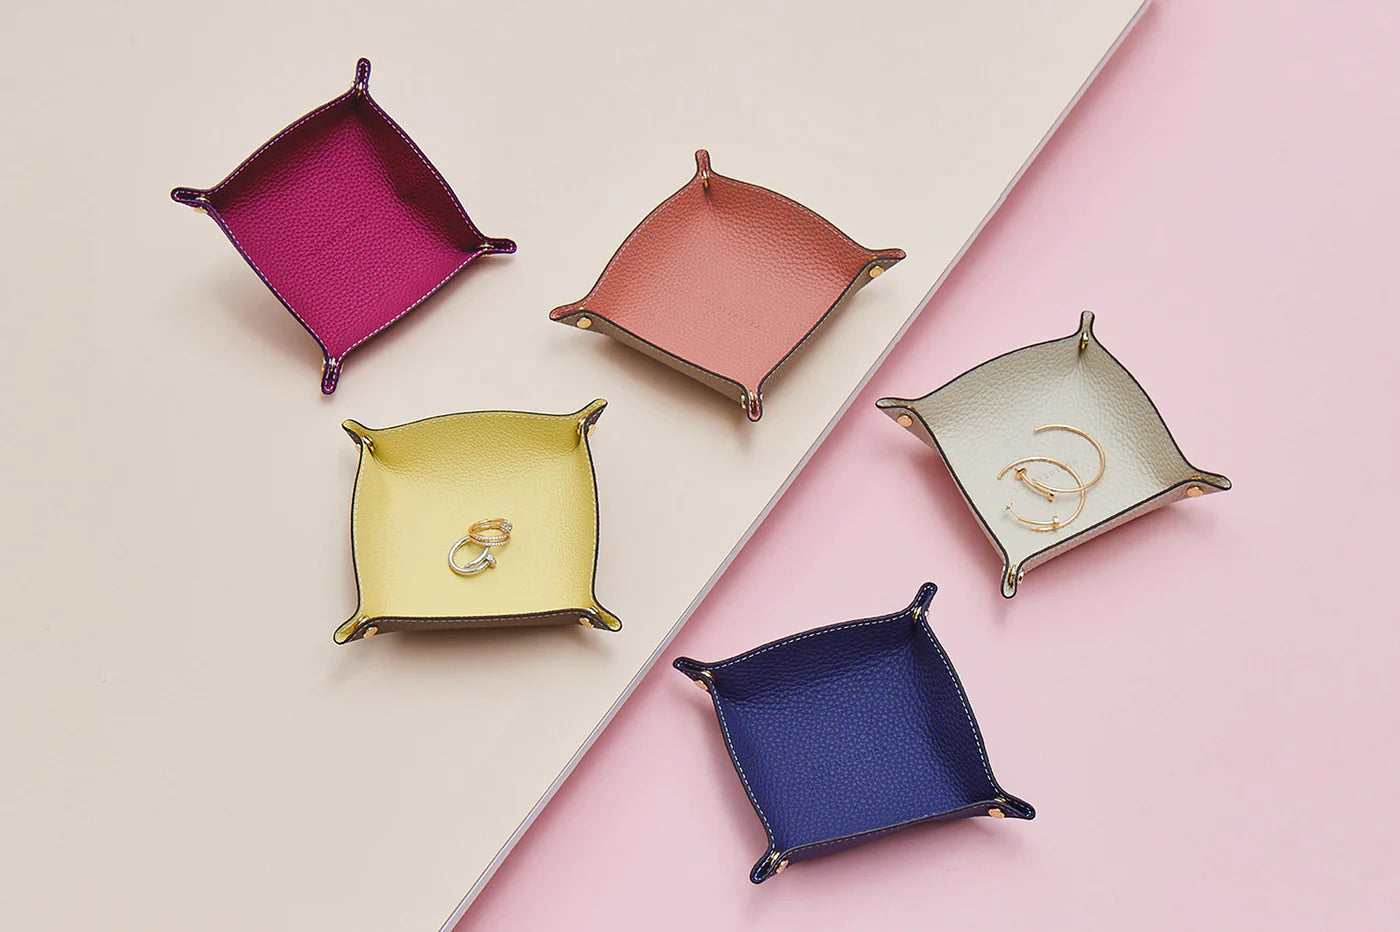 Small leather accessories by BONAVENTURA in summery colors.